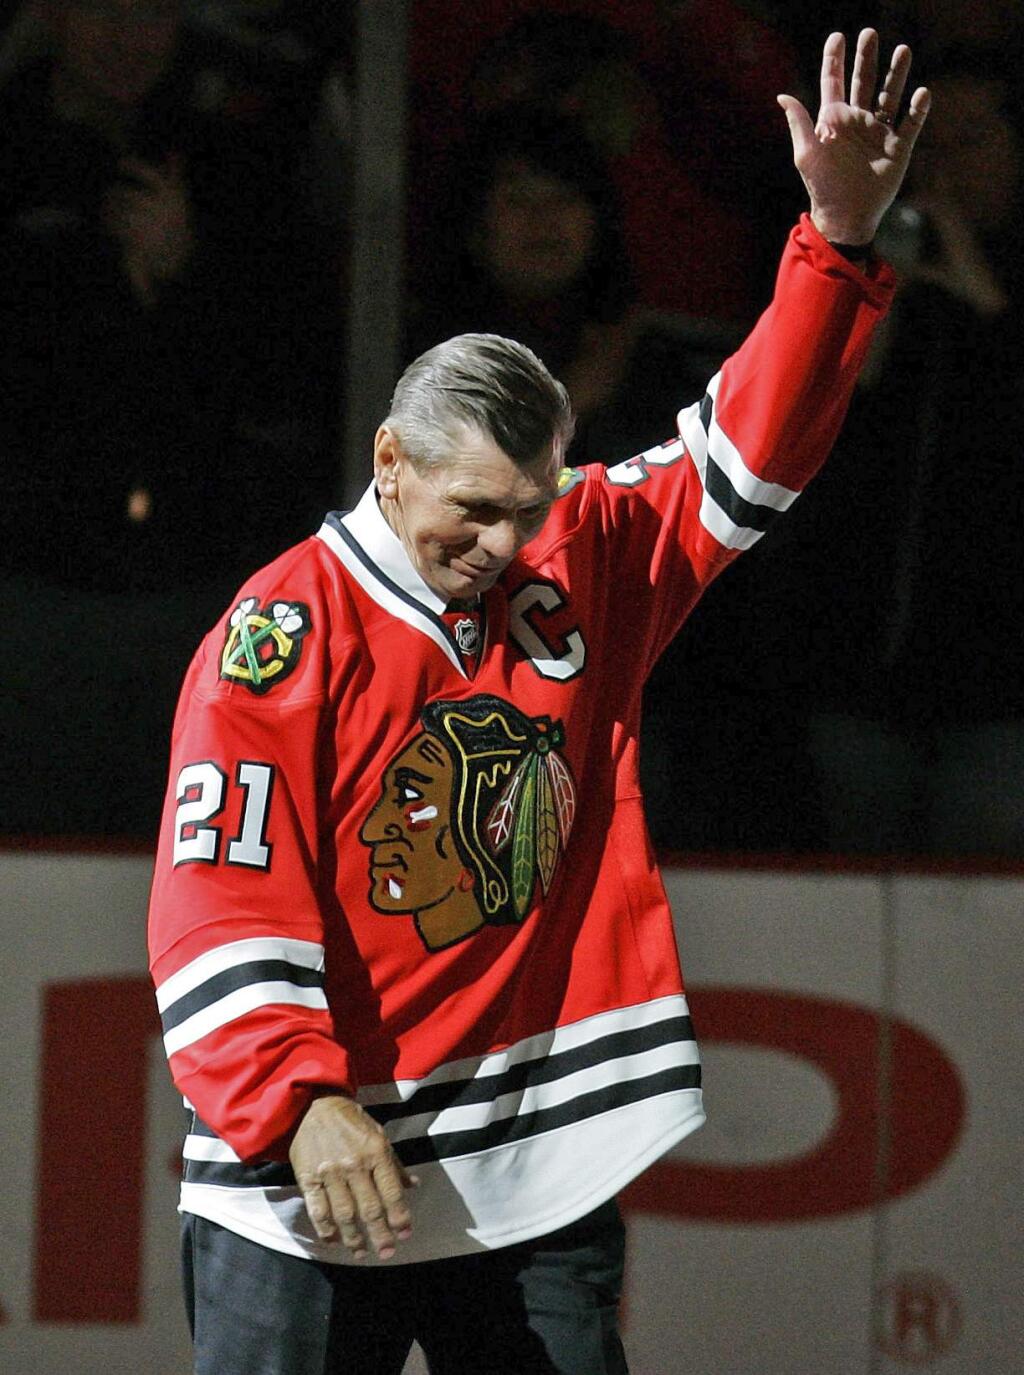 In this March 7, 2008, file photo, Chicago Blackhawks great Stan Mikita waves to fans as they as he is introduced before an NHL hockey game against the San Jose Sharks in Chicago. Mikita, who played for the Blackhawks for 22 seasons, becoming one of the franchise's most revered figures, has died, the Blackhawks announced Tuesday, Aug. 7, 2018. He was 78. (AP Photo/Brian Kersey, File)